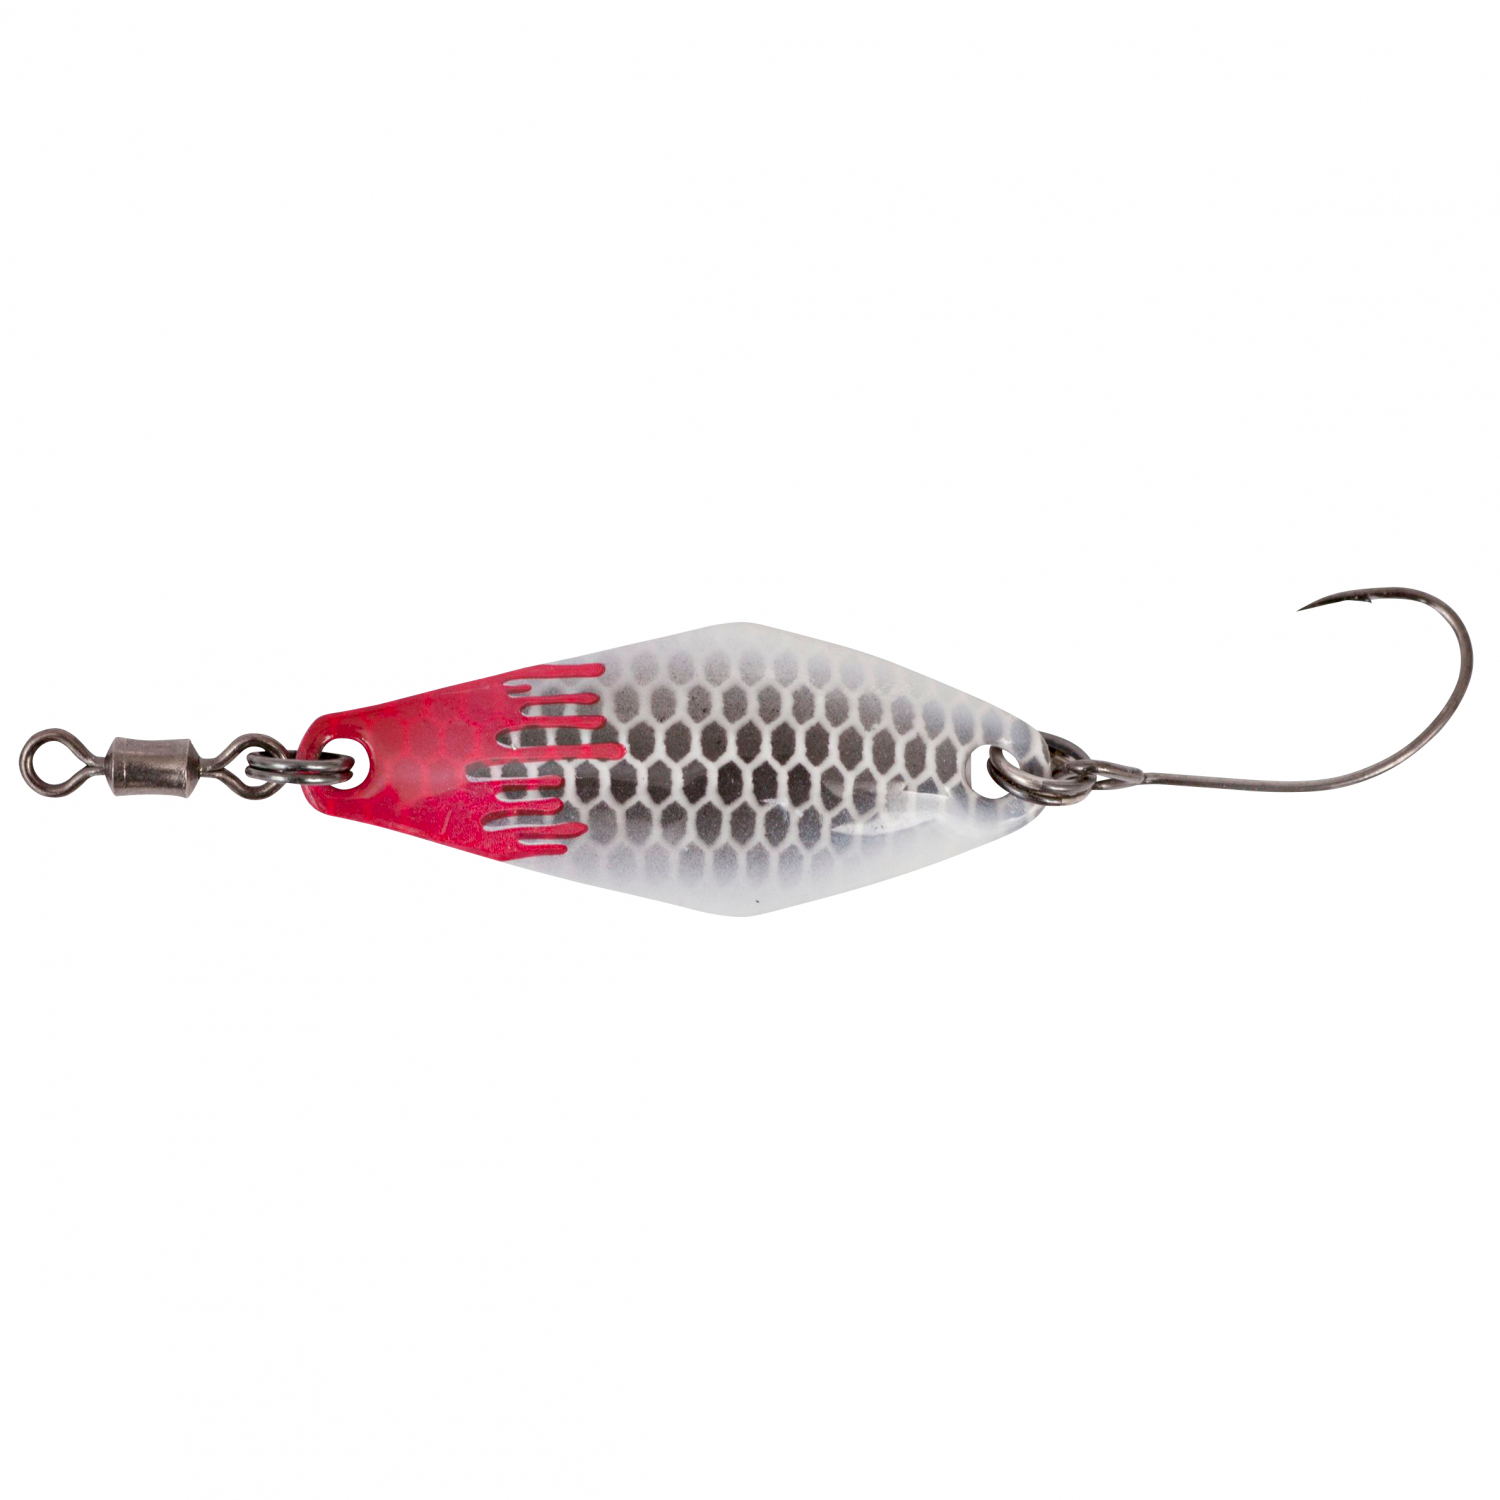 Magic Trout Bloddy Zoom Spoon (black/red) 